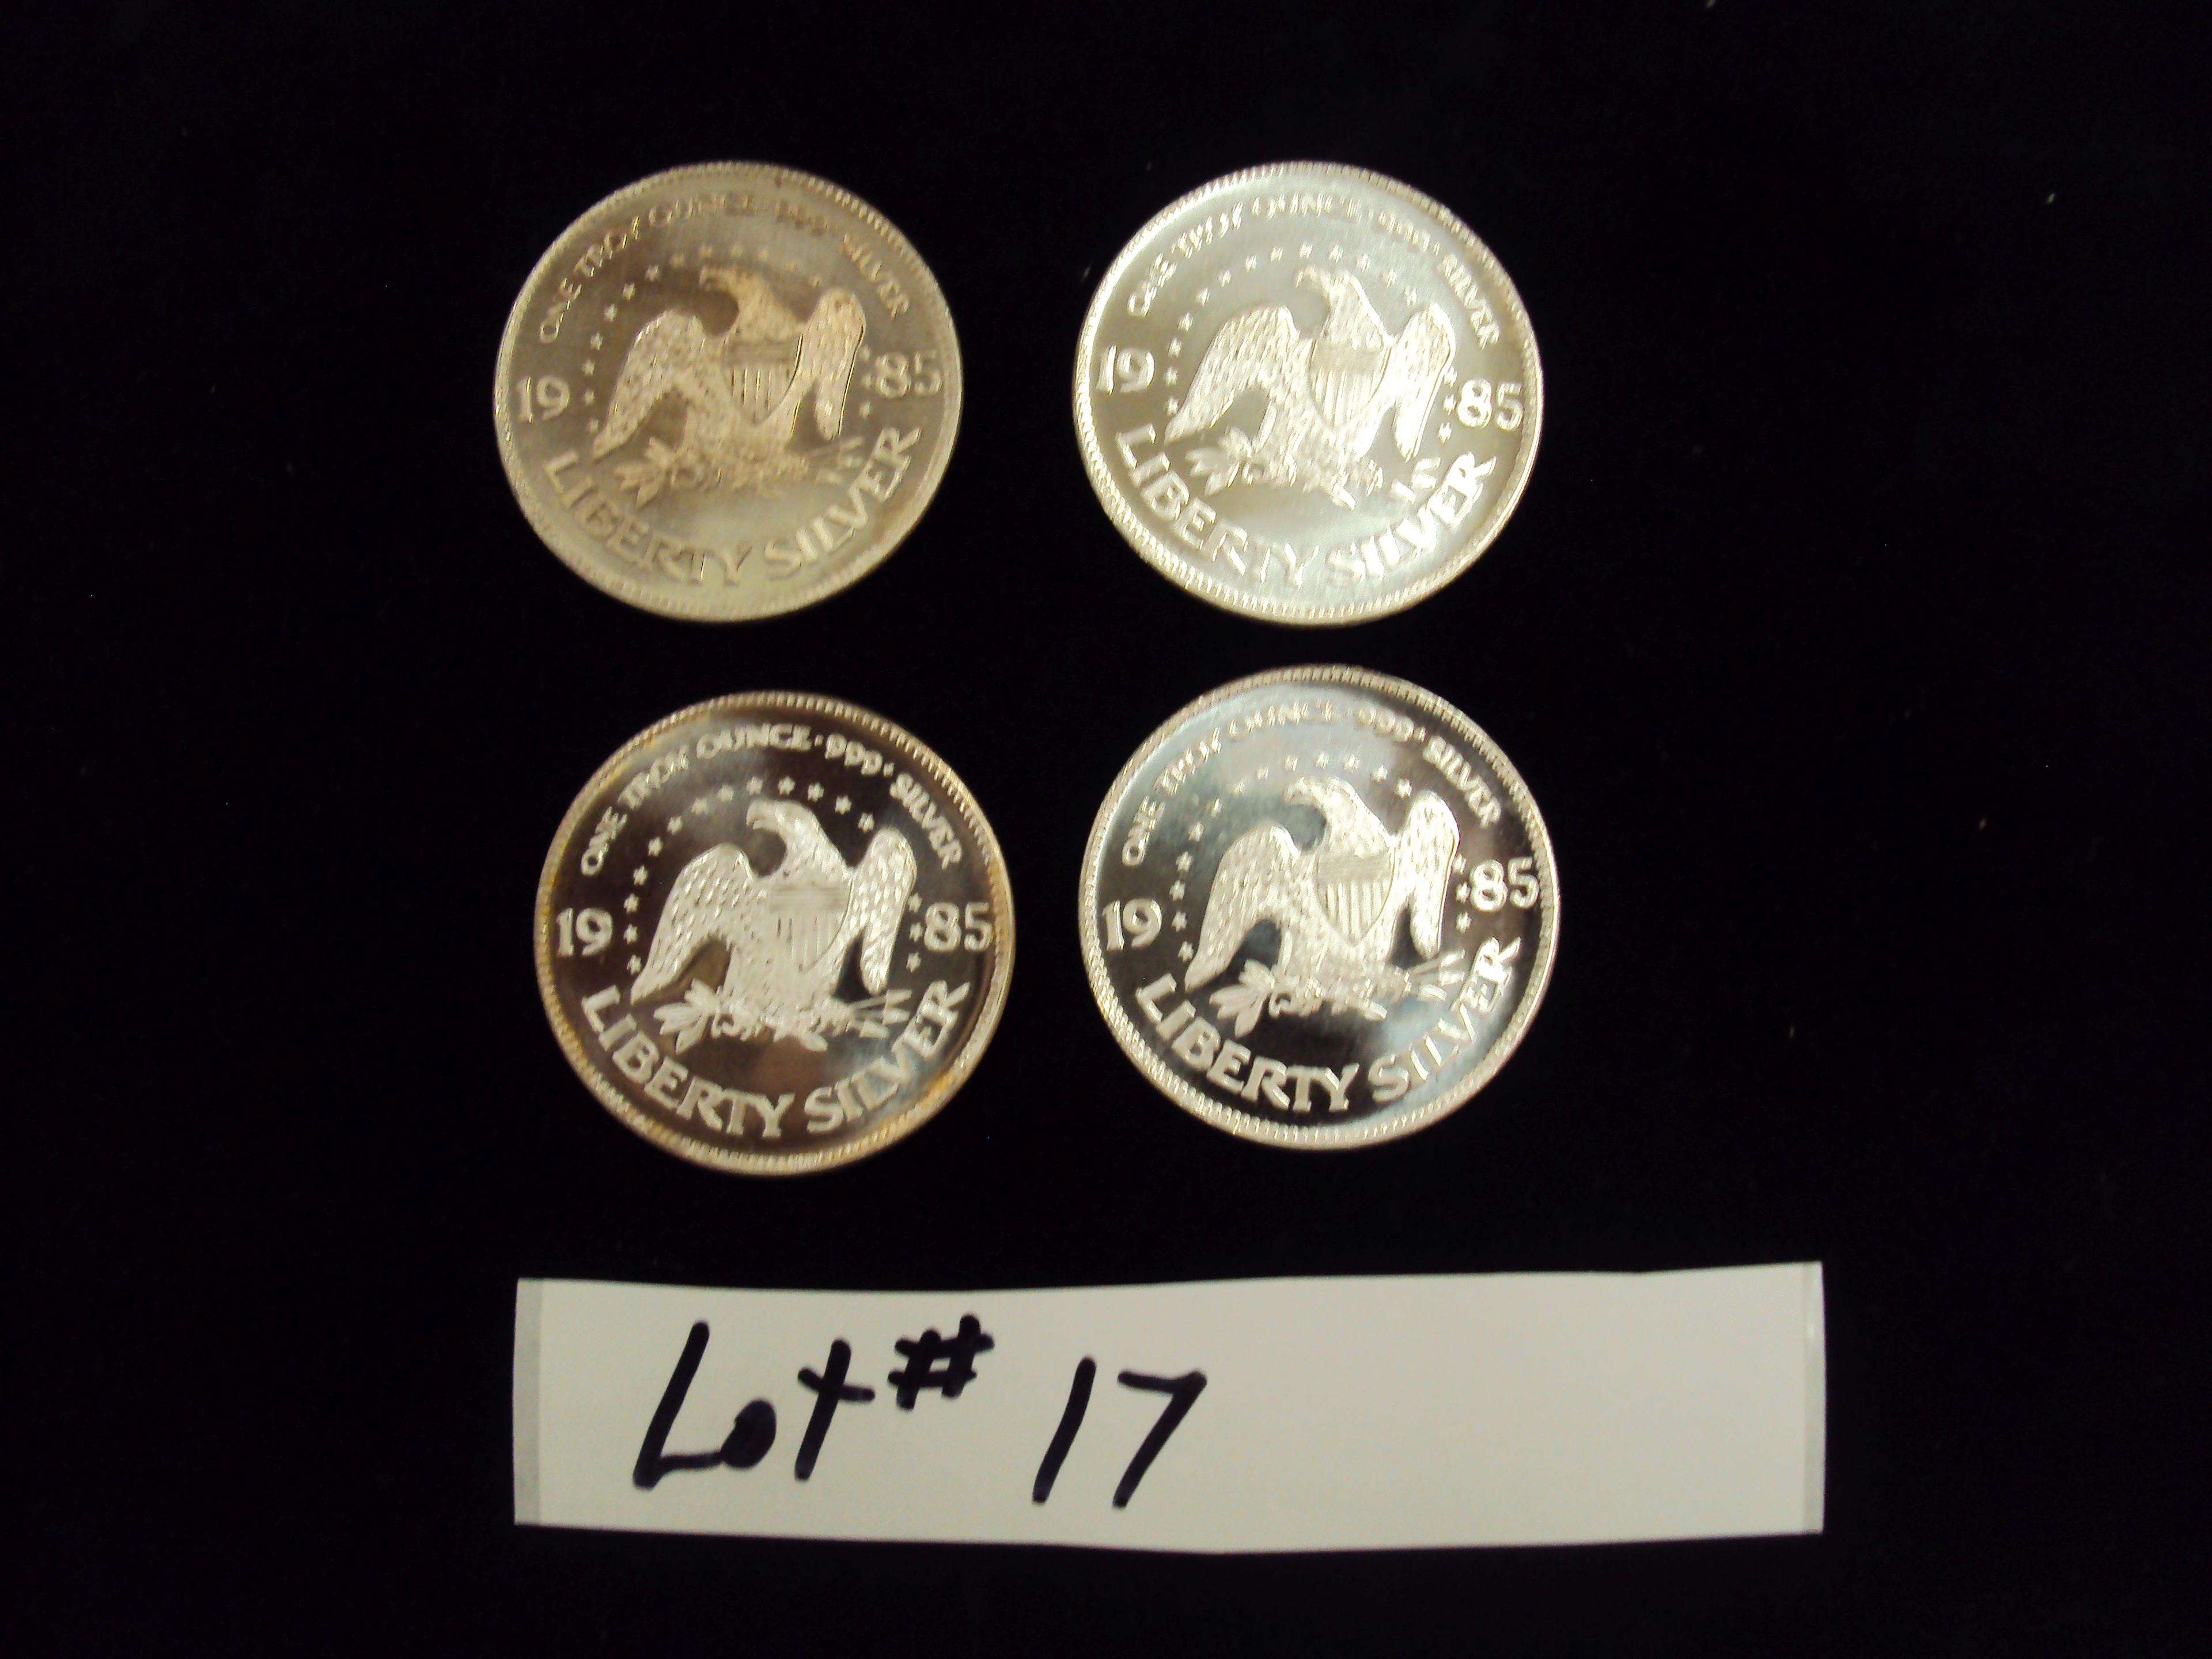 LOT OF 4 - 1985 SILVER COINS - ONE TROY OUNCE SILVER EACH - MULTIPLY YOUR BID BY 4